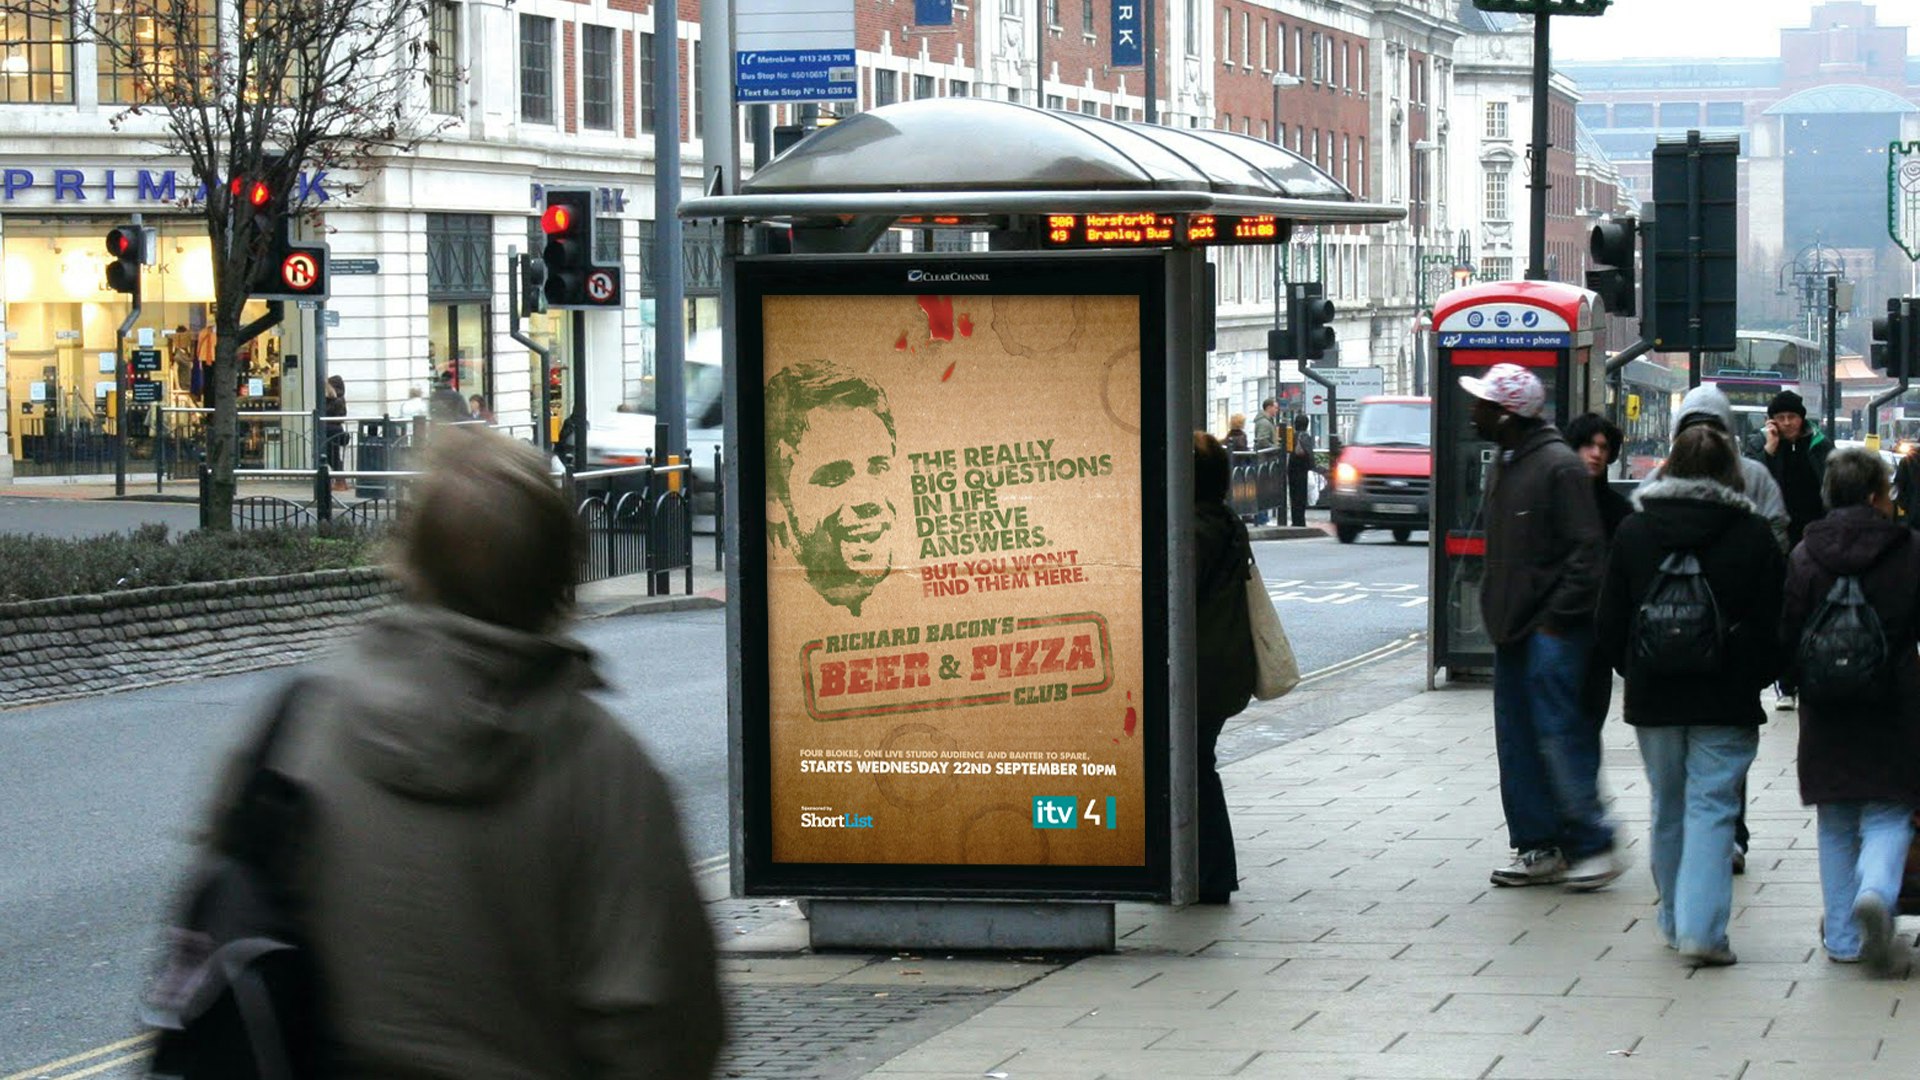 Jason Ford - Richard Bacon's Beer & Pizza Club Out of Home Advertising